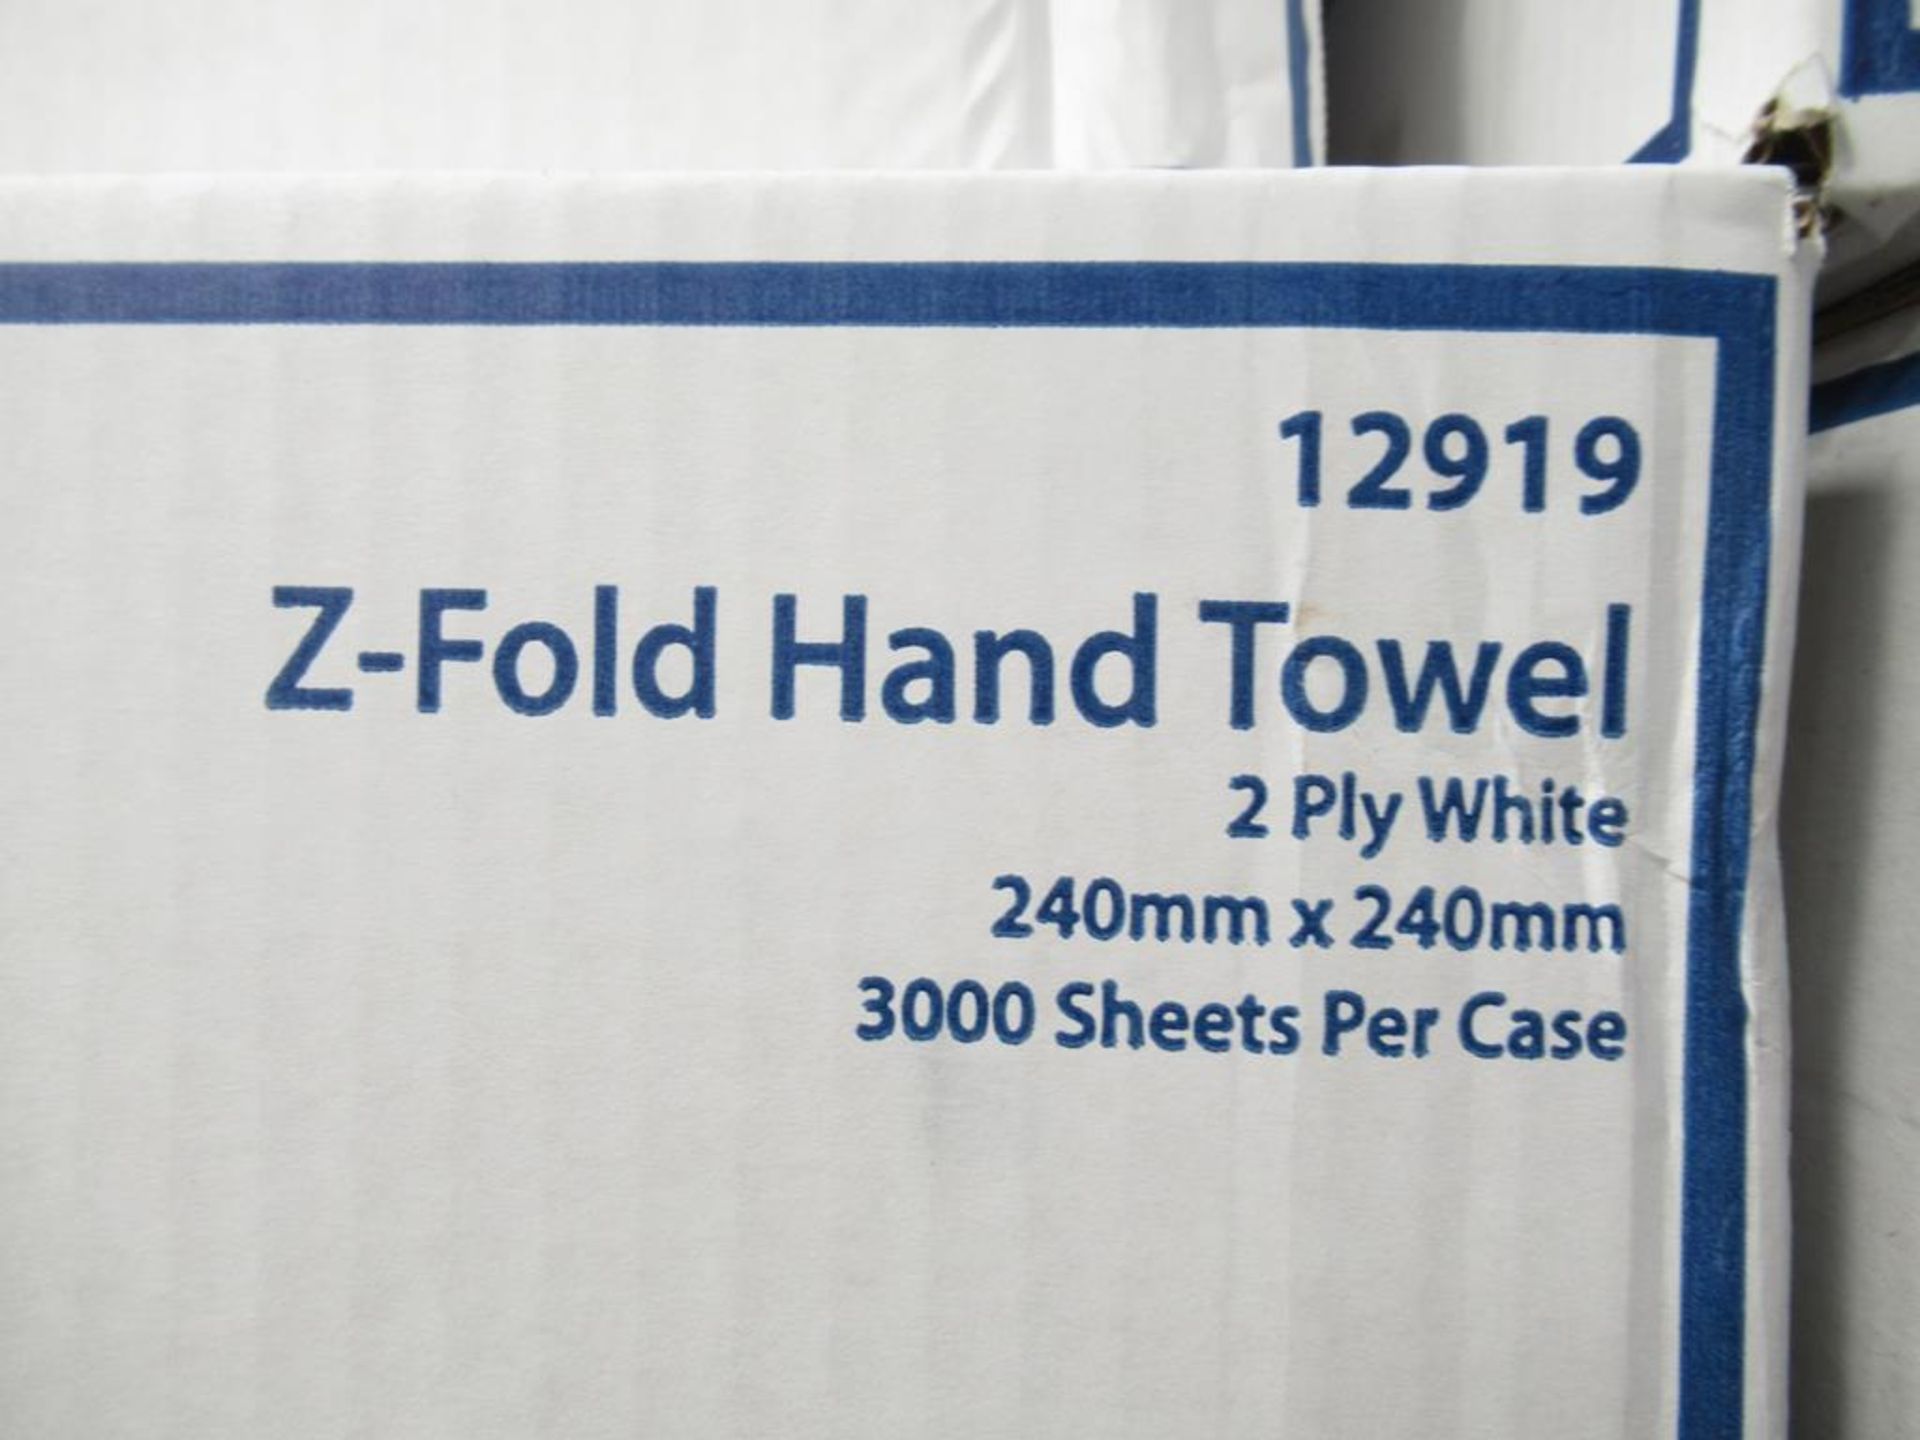 41 x boxes of Optimum Professional Z-fold Hand Towels 3000 Sheets per case in white - Image 2 of 2